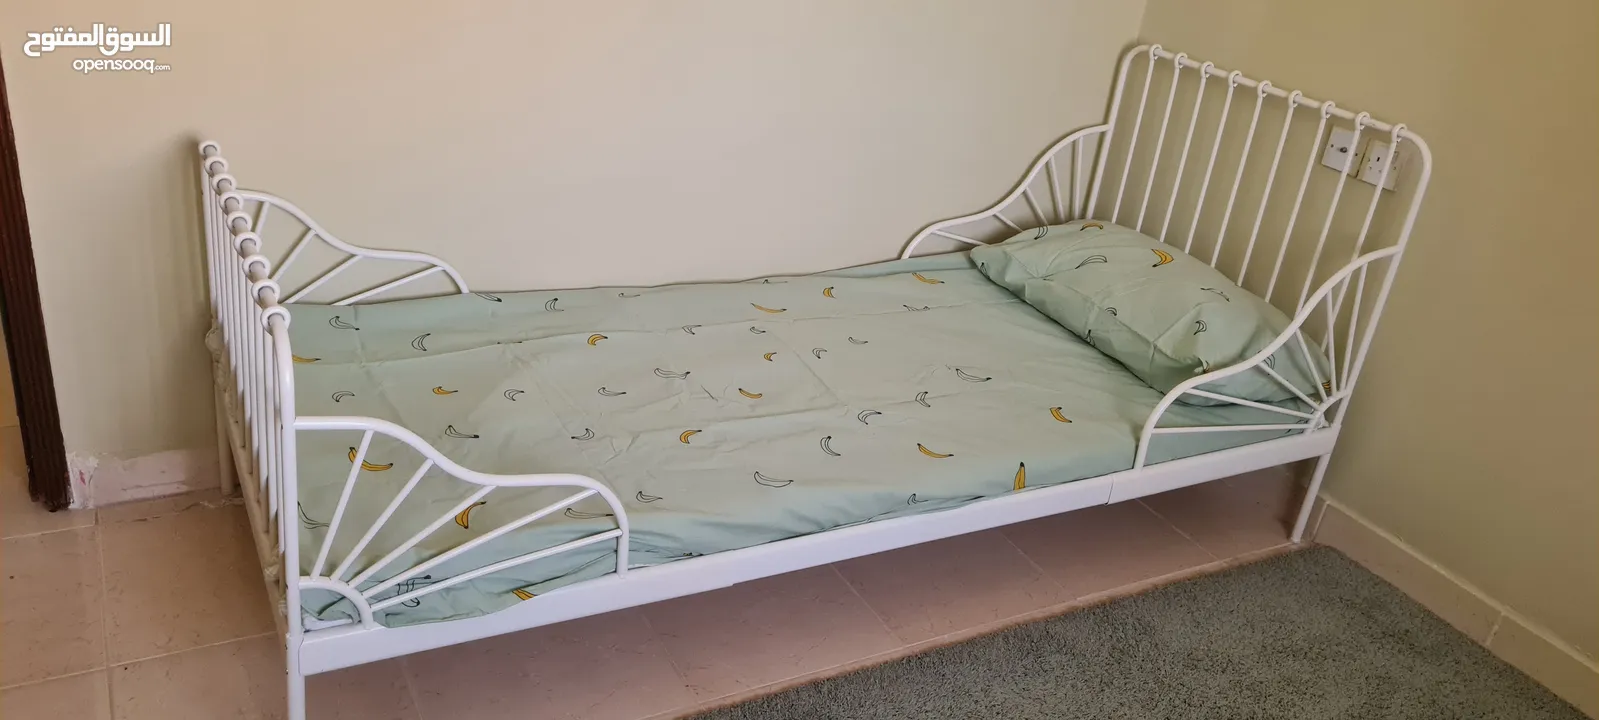 Extendable kids bed with quality matress